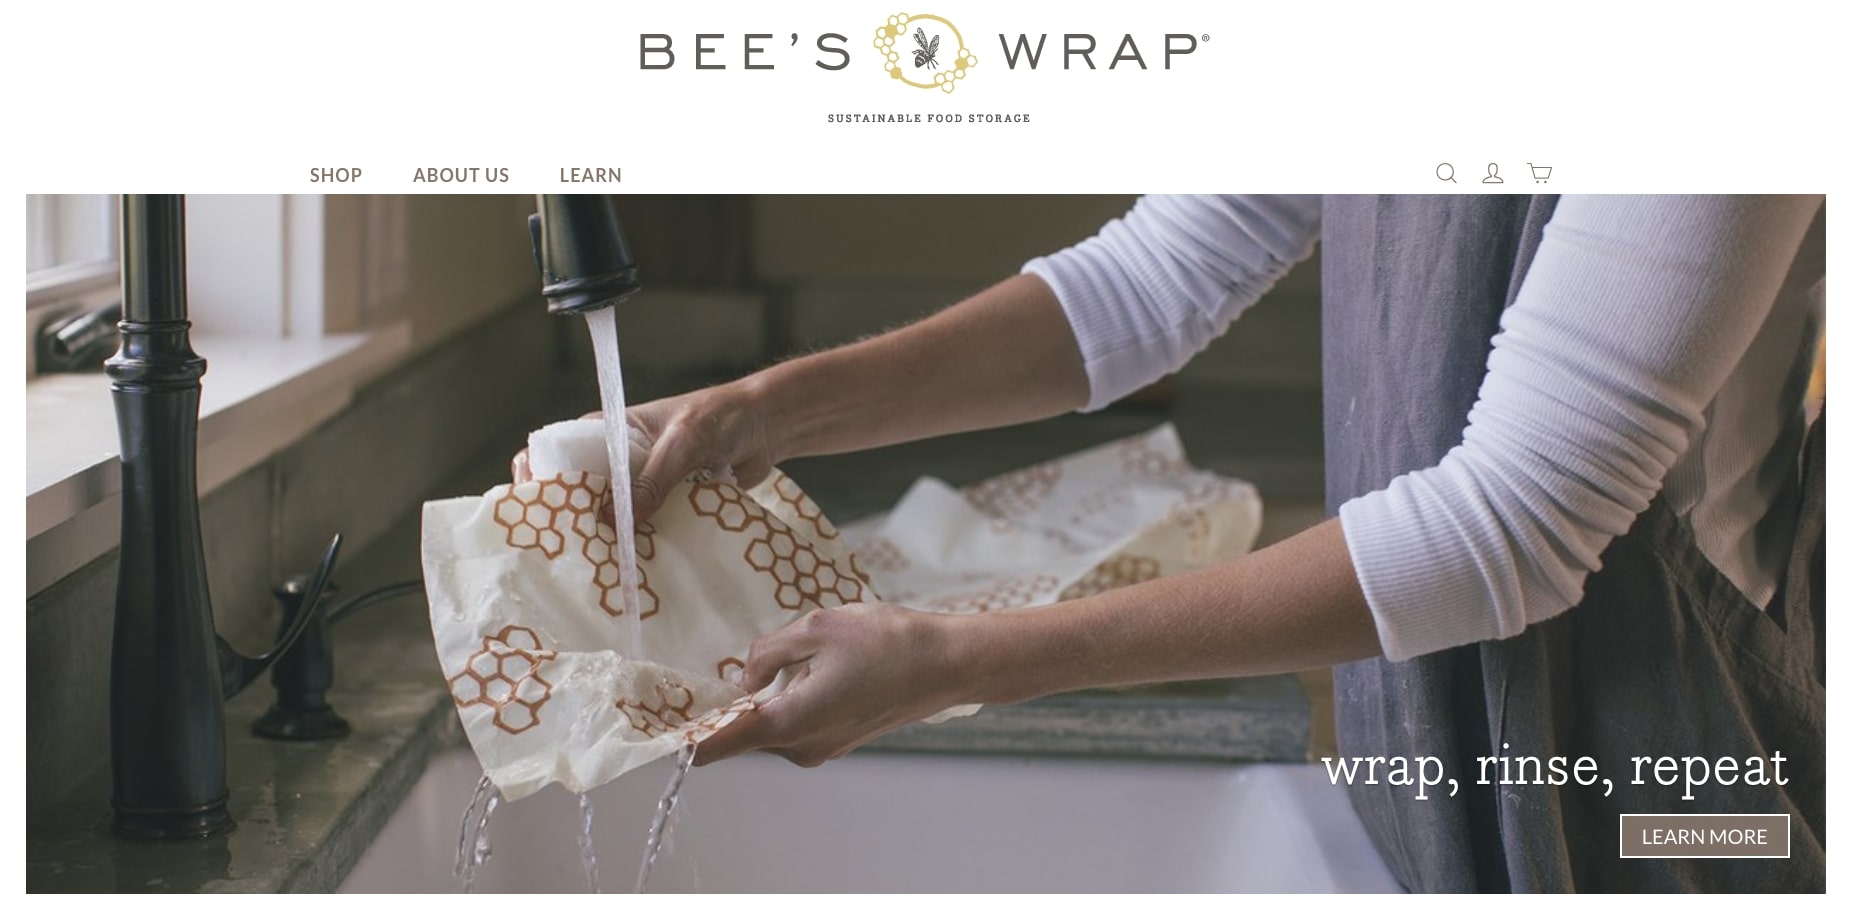 bee's wrap is an example of a niche market business